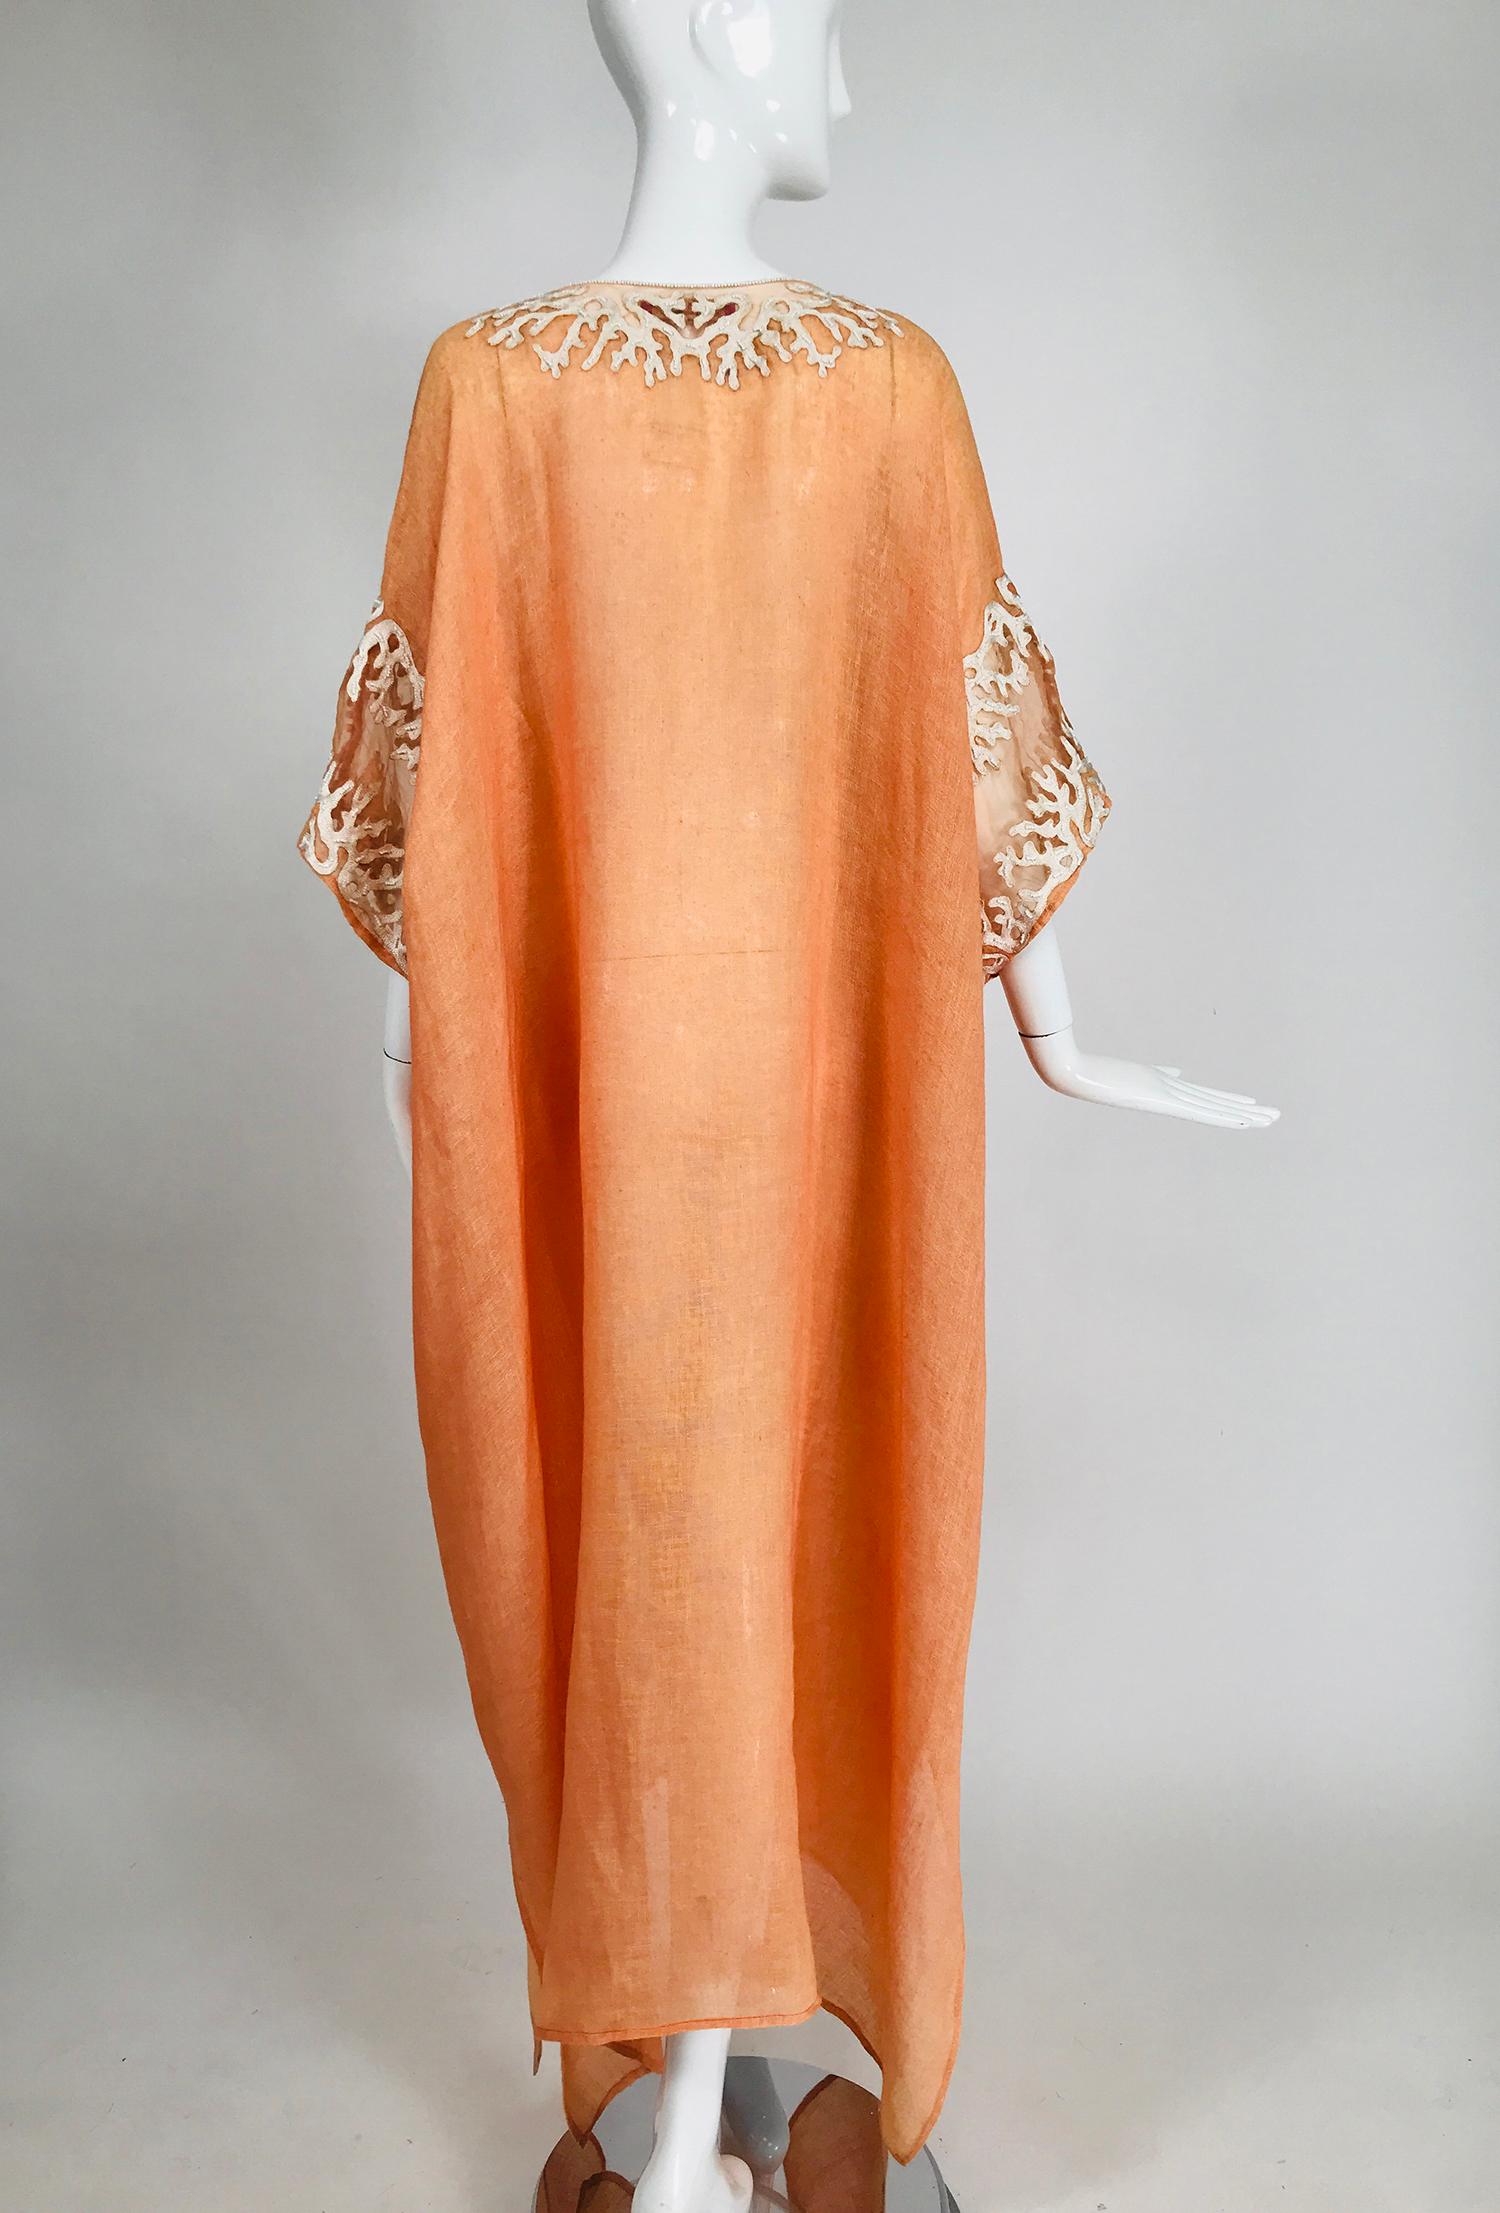 Jeannie McQueeny Coral Linen Applique & Beaded Caftan  In Good Condition In West Palm Beach, FL